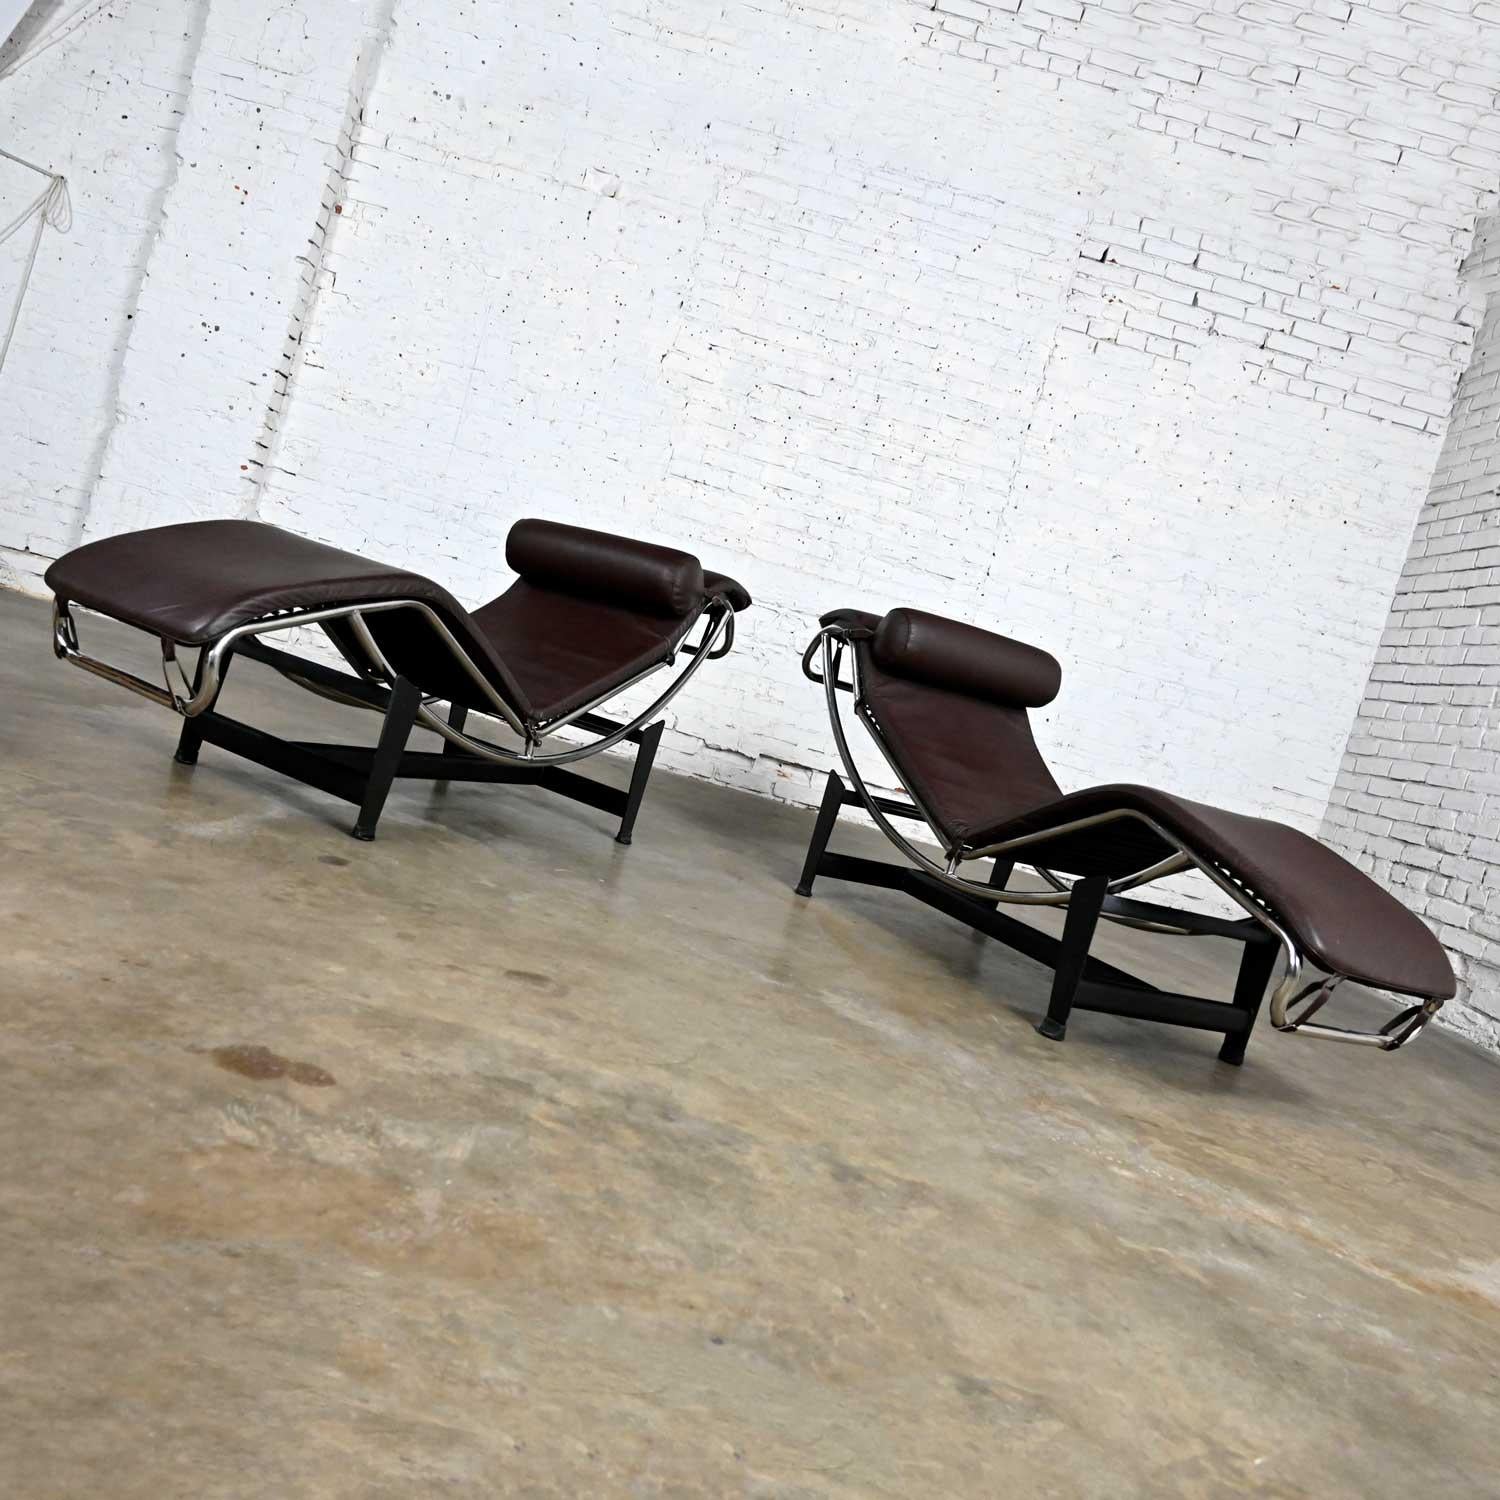 Pair Chaise Lounge Chairs Brown Leather & Chrome Style Le Corbusier LC4 In Good Condition For Sale In Topeka, KS